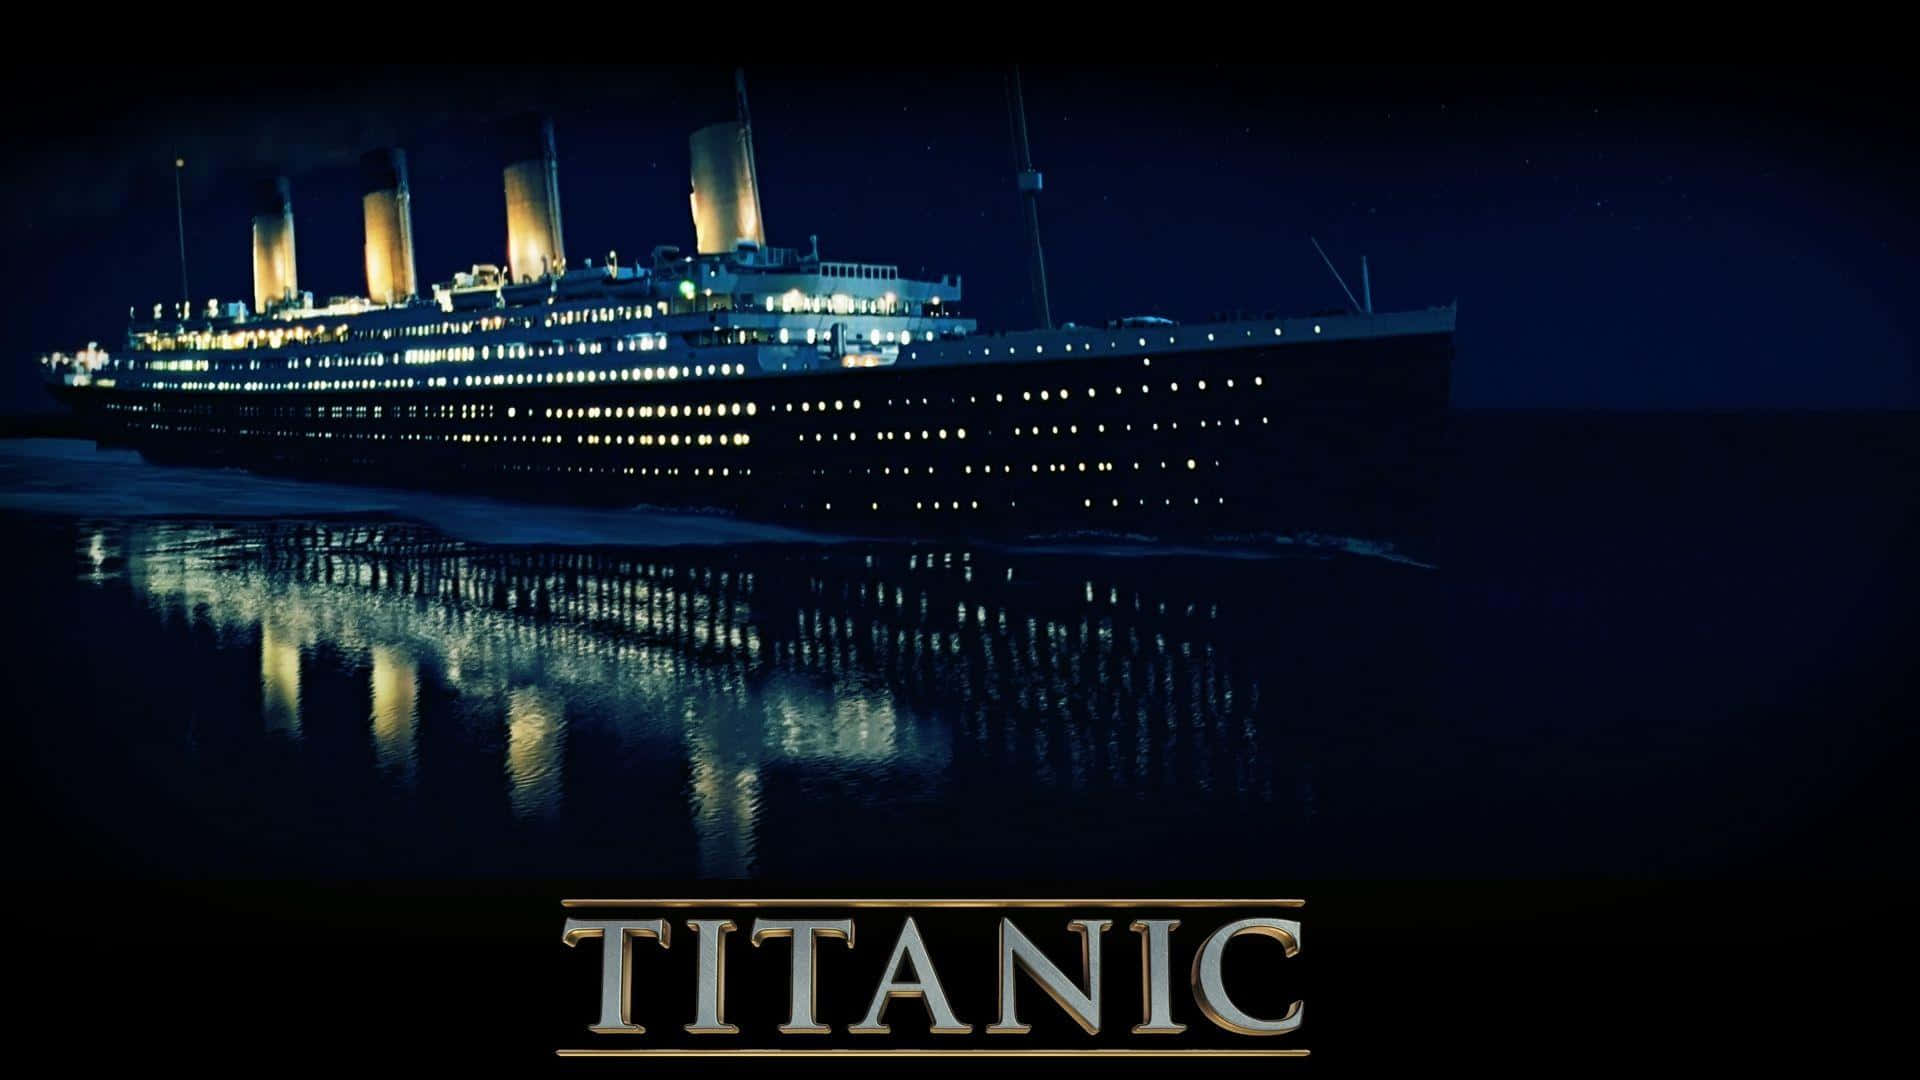 The Titanic and her final resting grounds